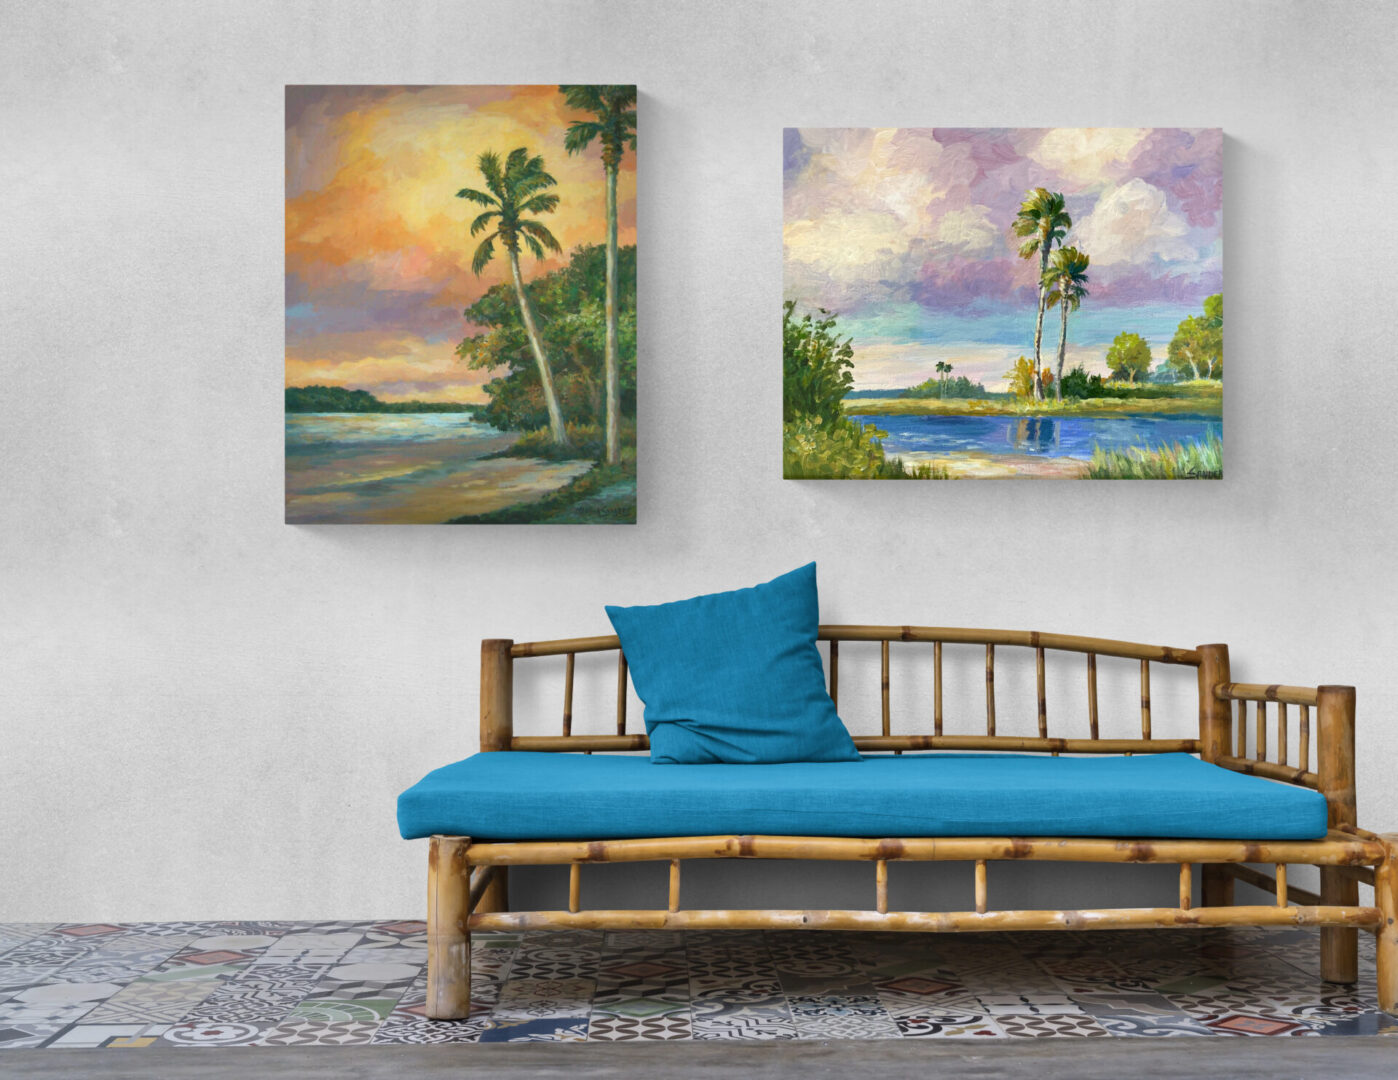 Local Fine Art For Sale: Two paintings of palm trees are elegantly displayed as they hang on a wall.